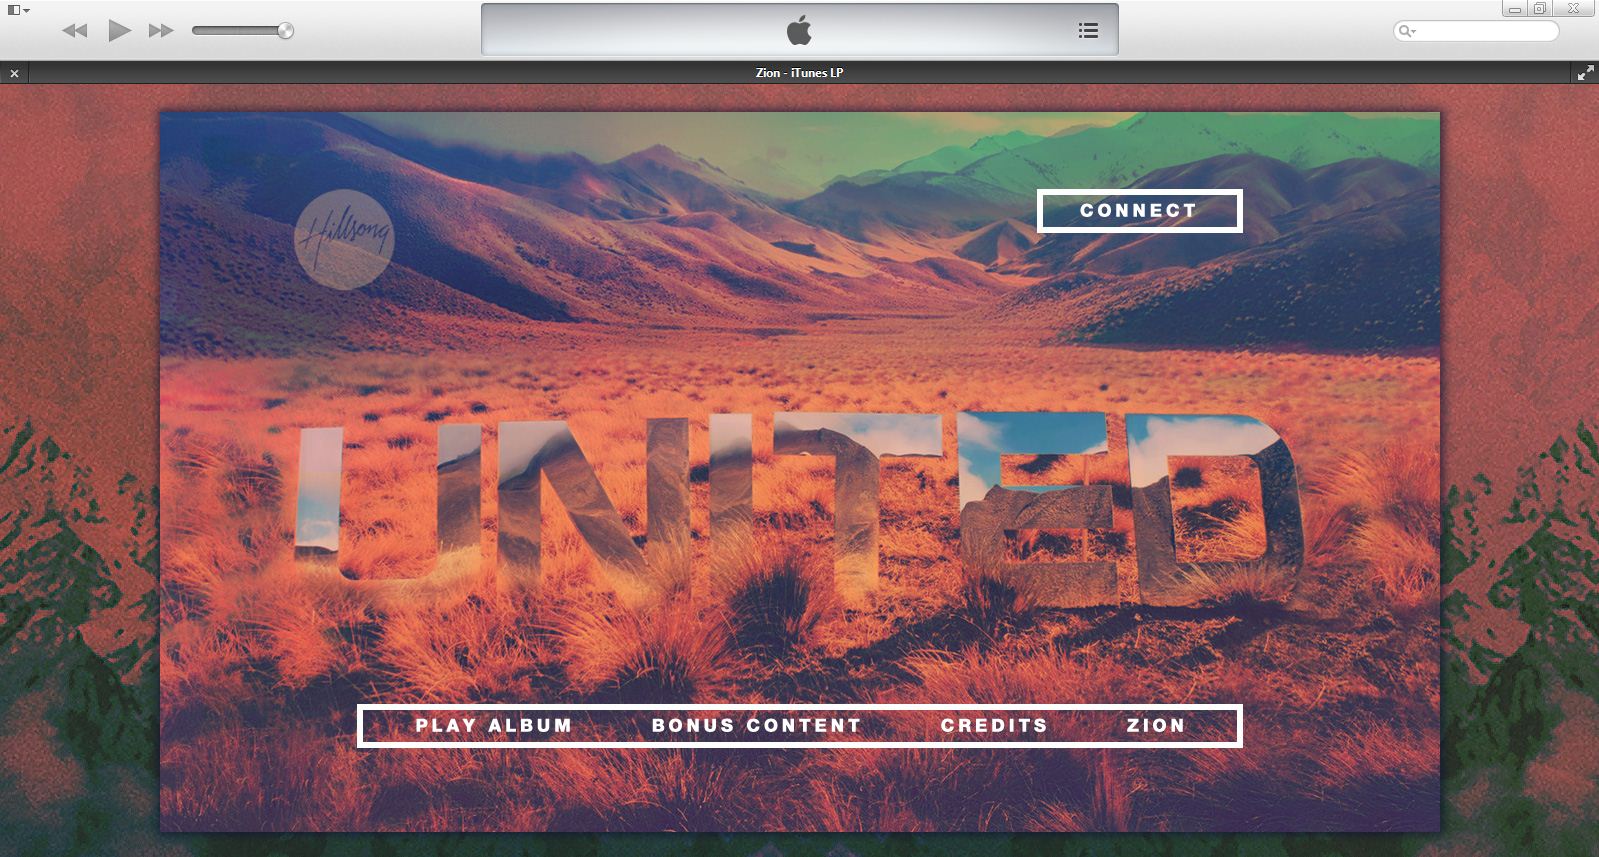 Hillsong United Zion Download